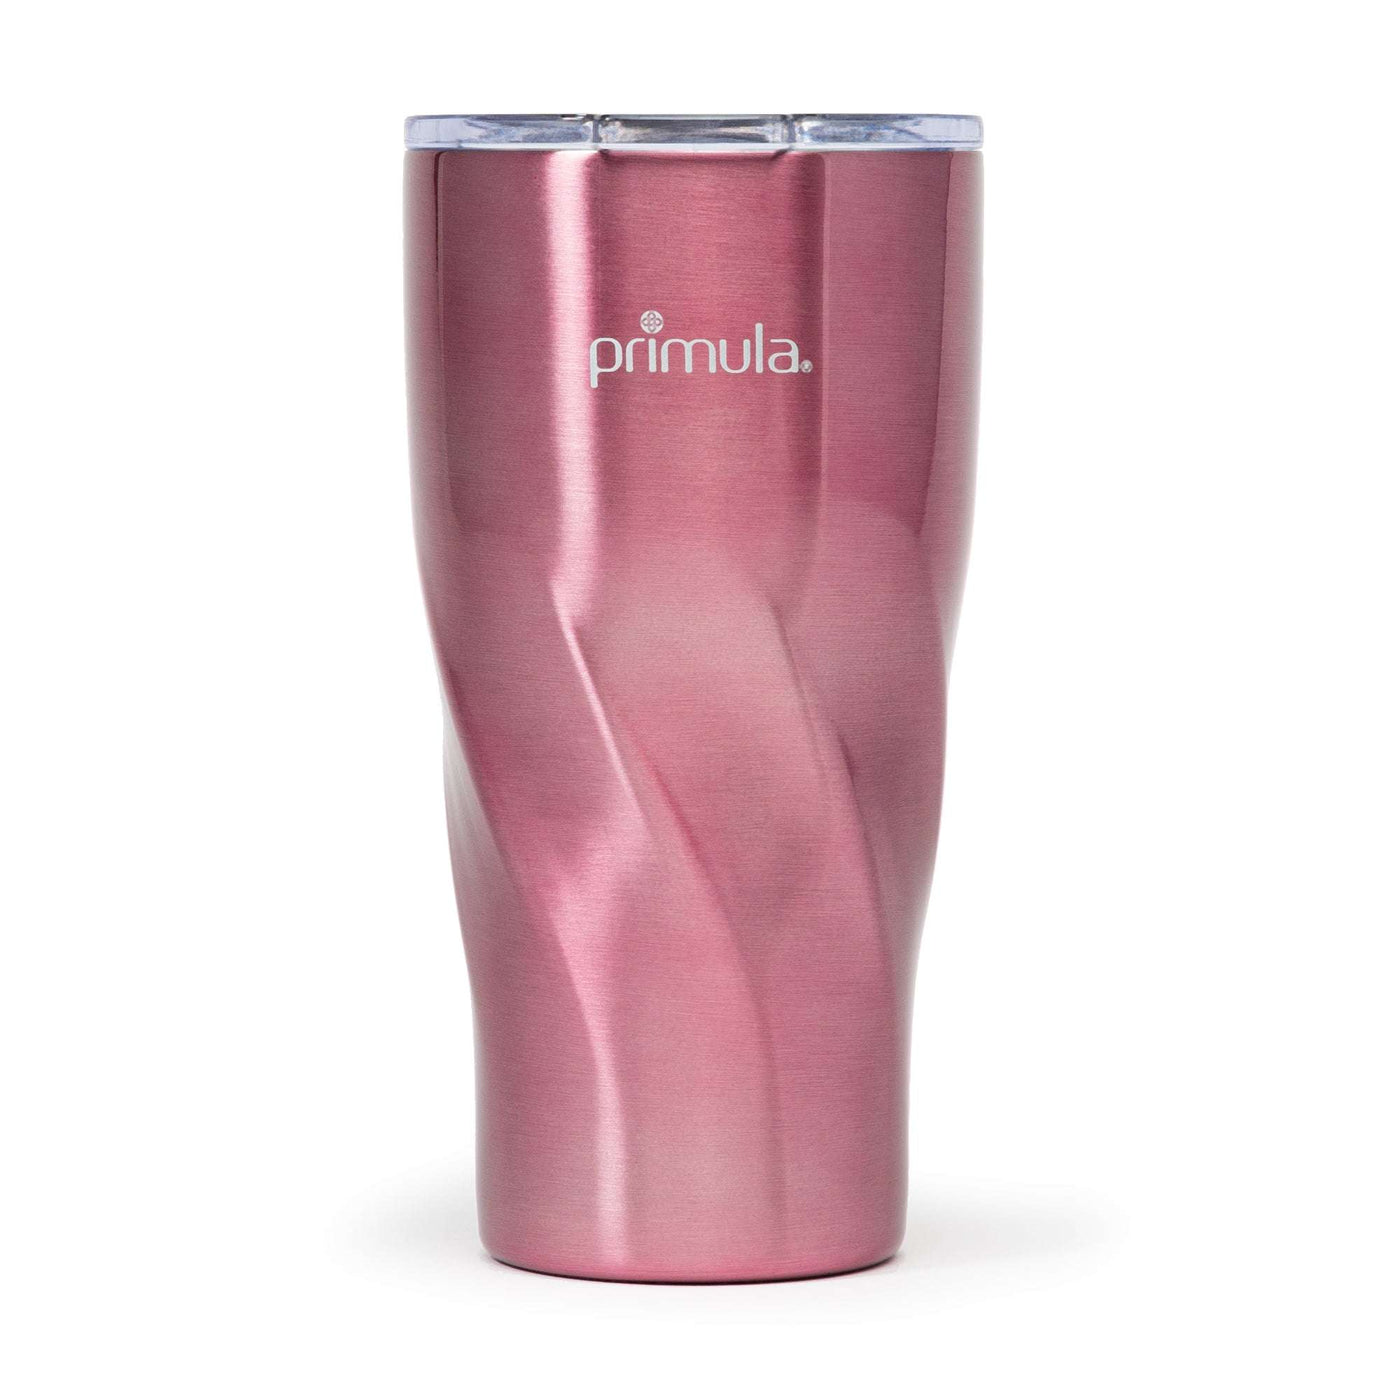 Primula Peak Hot or Cold Thermal Tumbler - Triple Brushed Stainless Steel